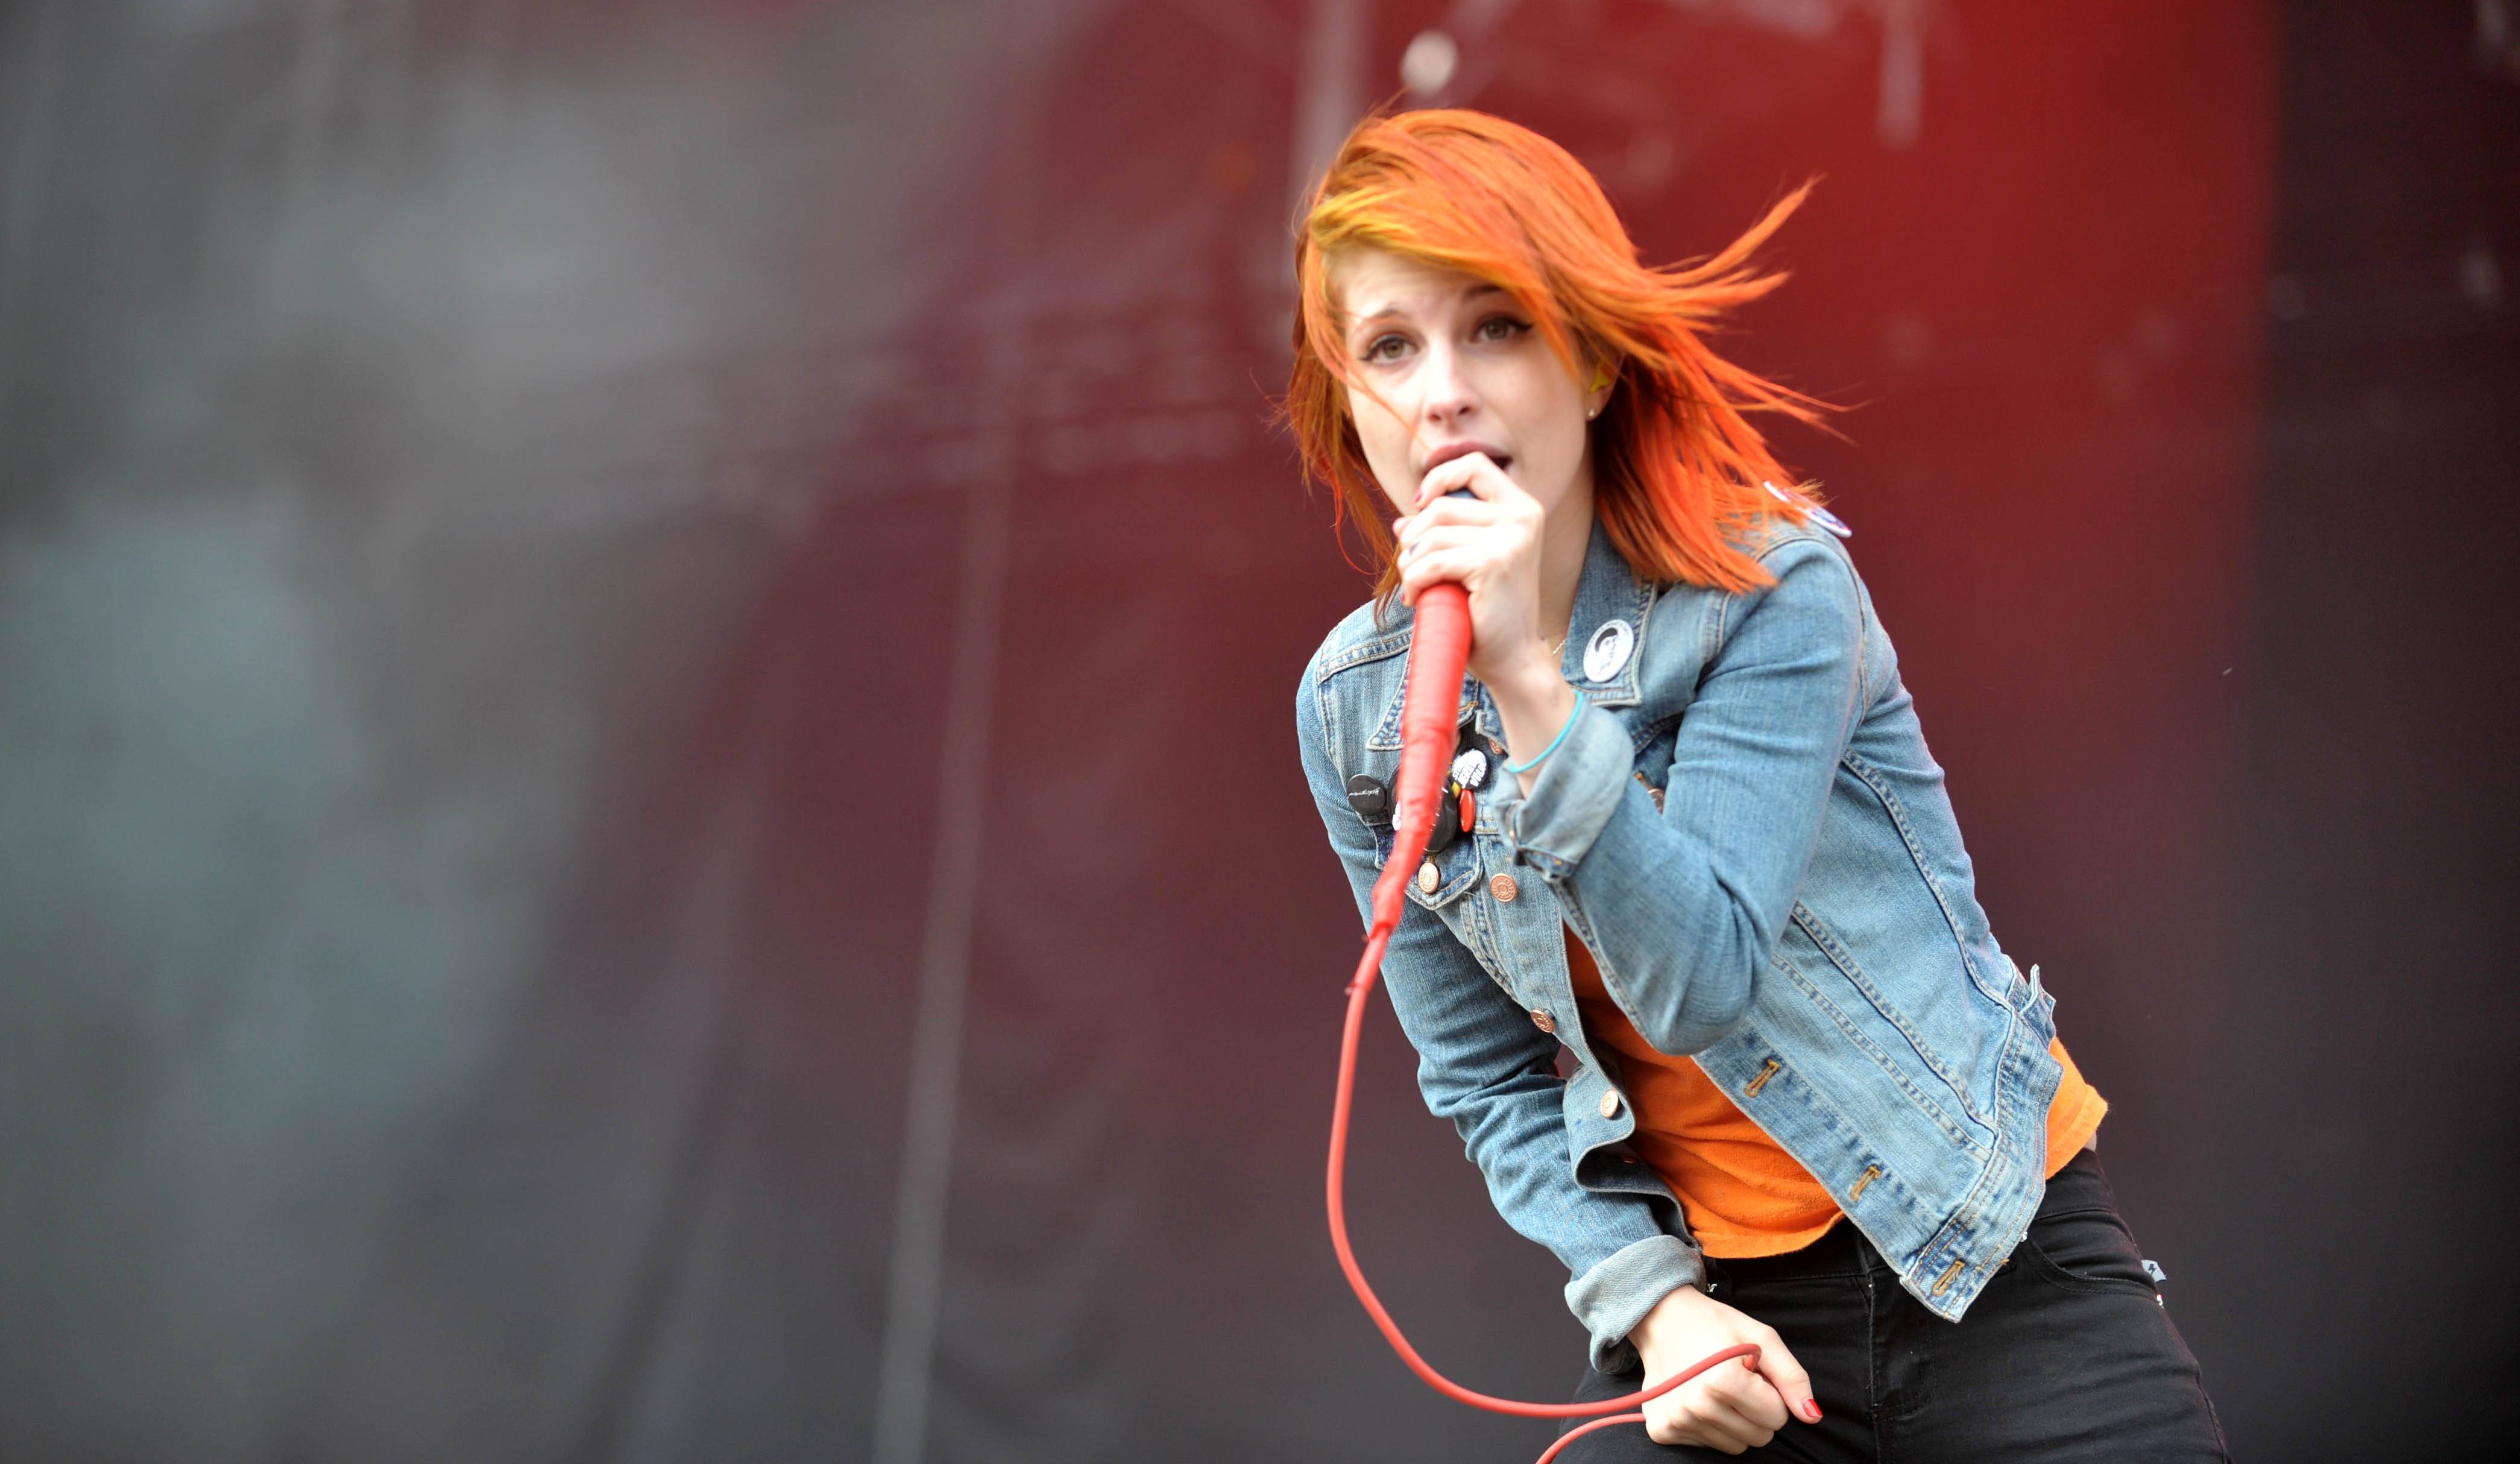 People 4180x2428 redhead singer women Paramore Hayley Williams music dyed hair microphone